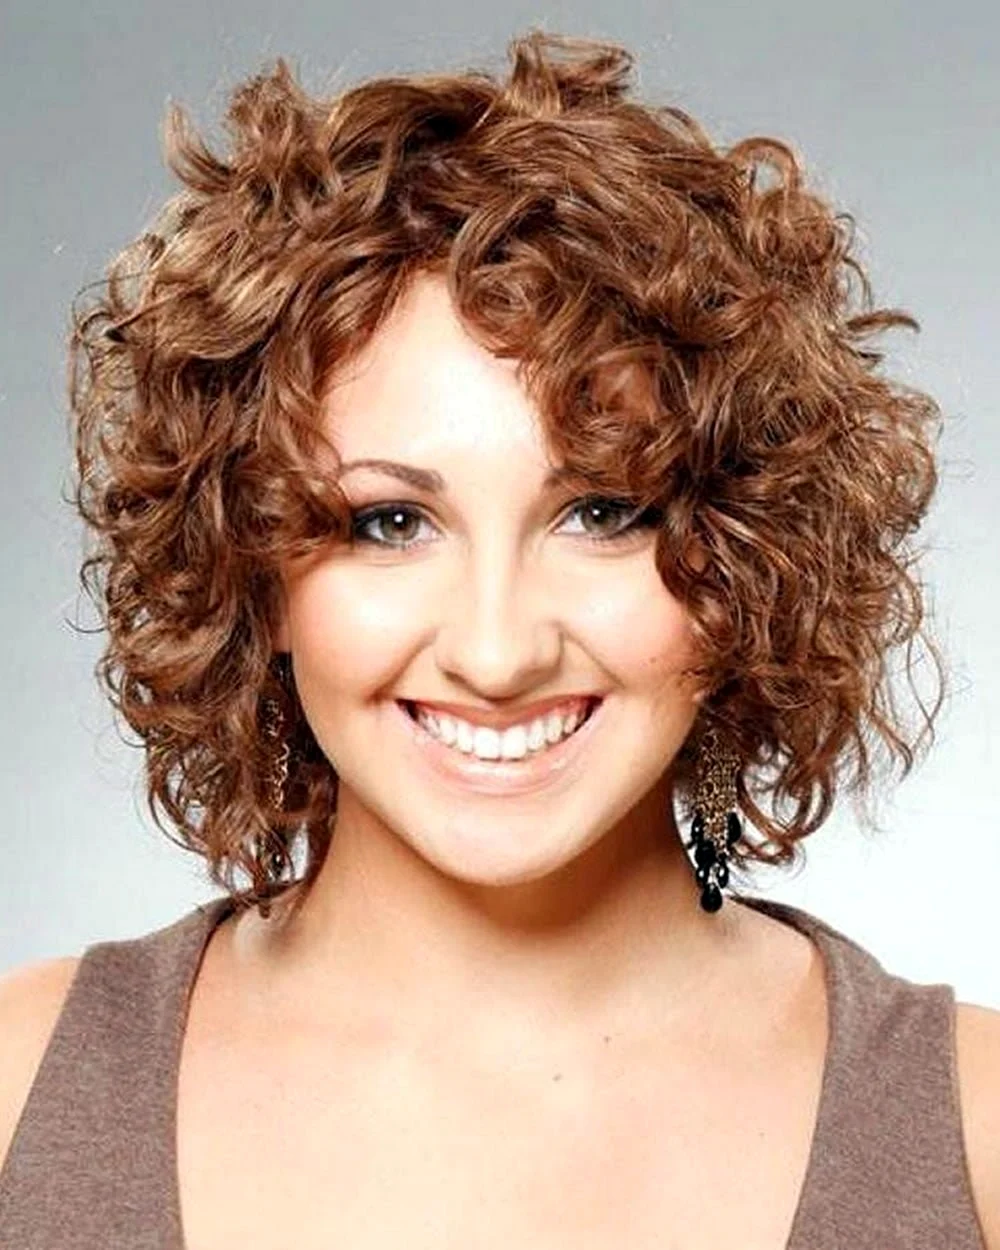 Hairstyle for short curly hair